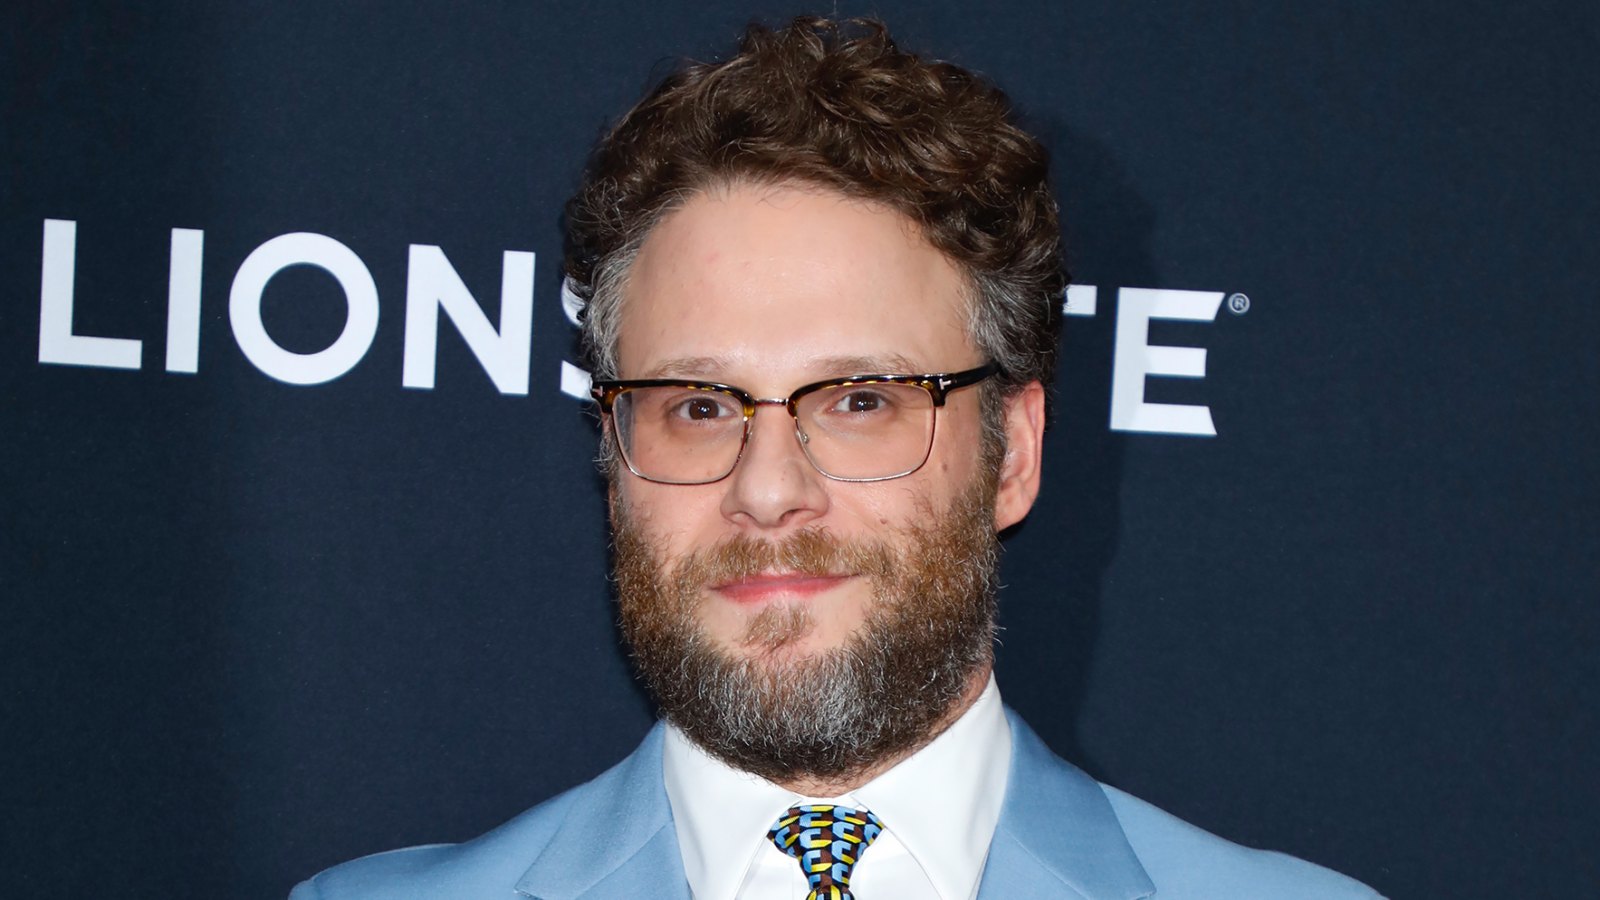 Seth Rogen Got High and Live Tweeted ‘Cats’ Says ‘Judi Dench Looks the Most Cuddly’